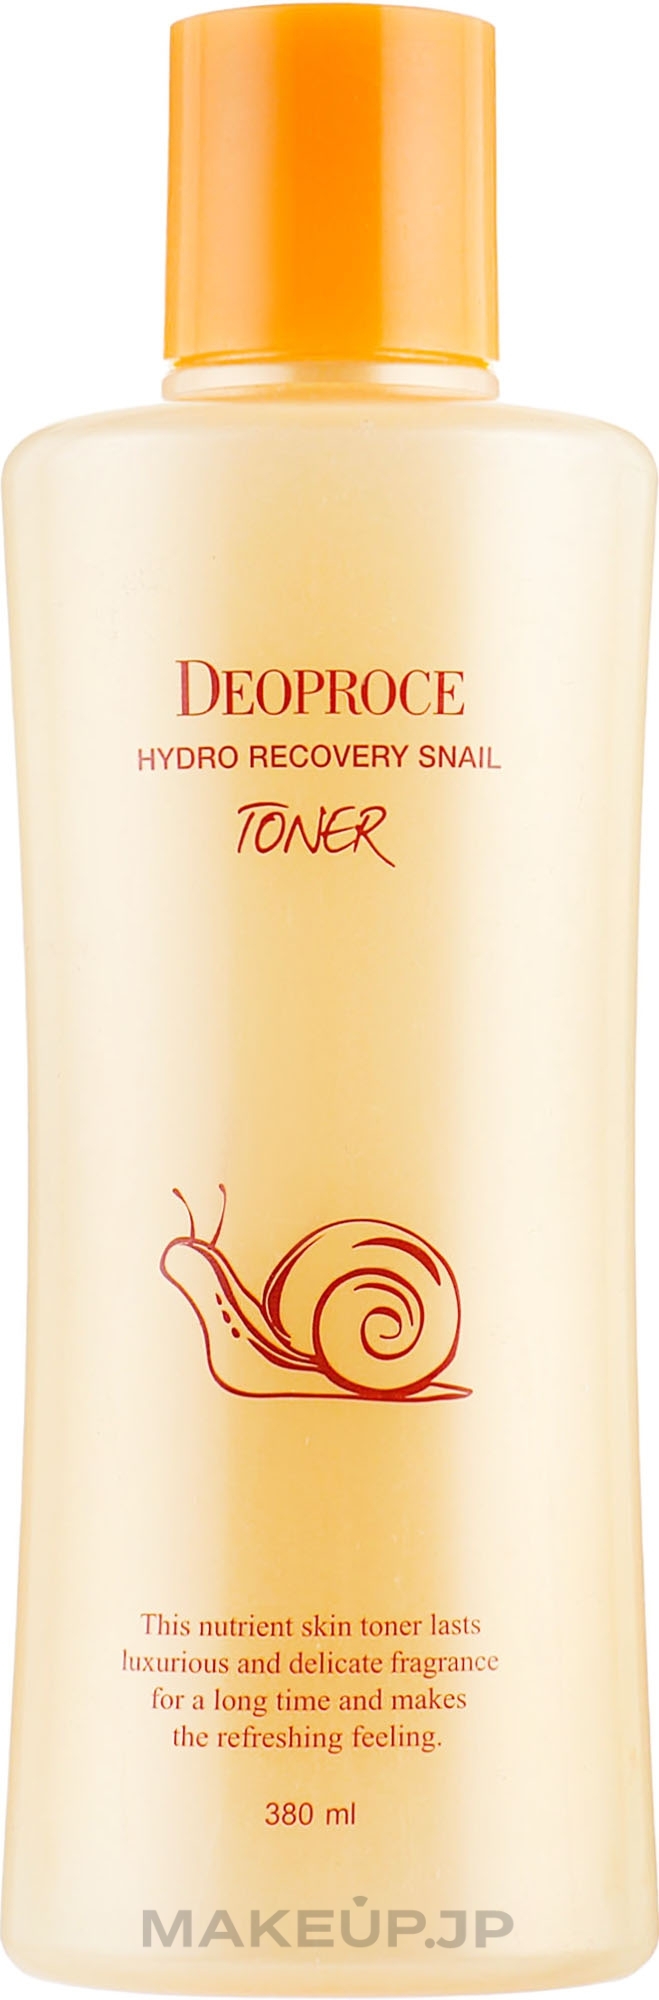 Snail Recovery Toner - Deoproce Hydro Recovery Snail Toner — photo 380 ml